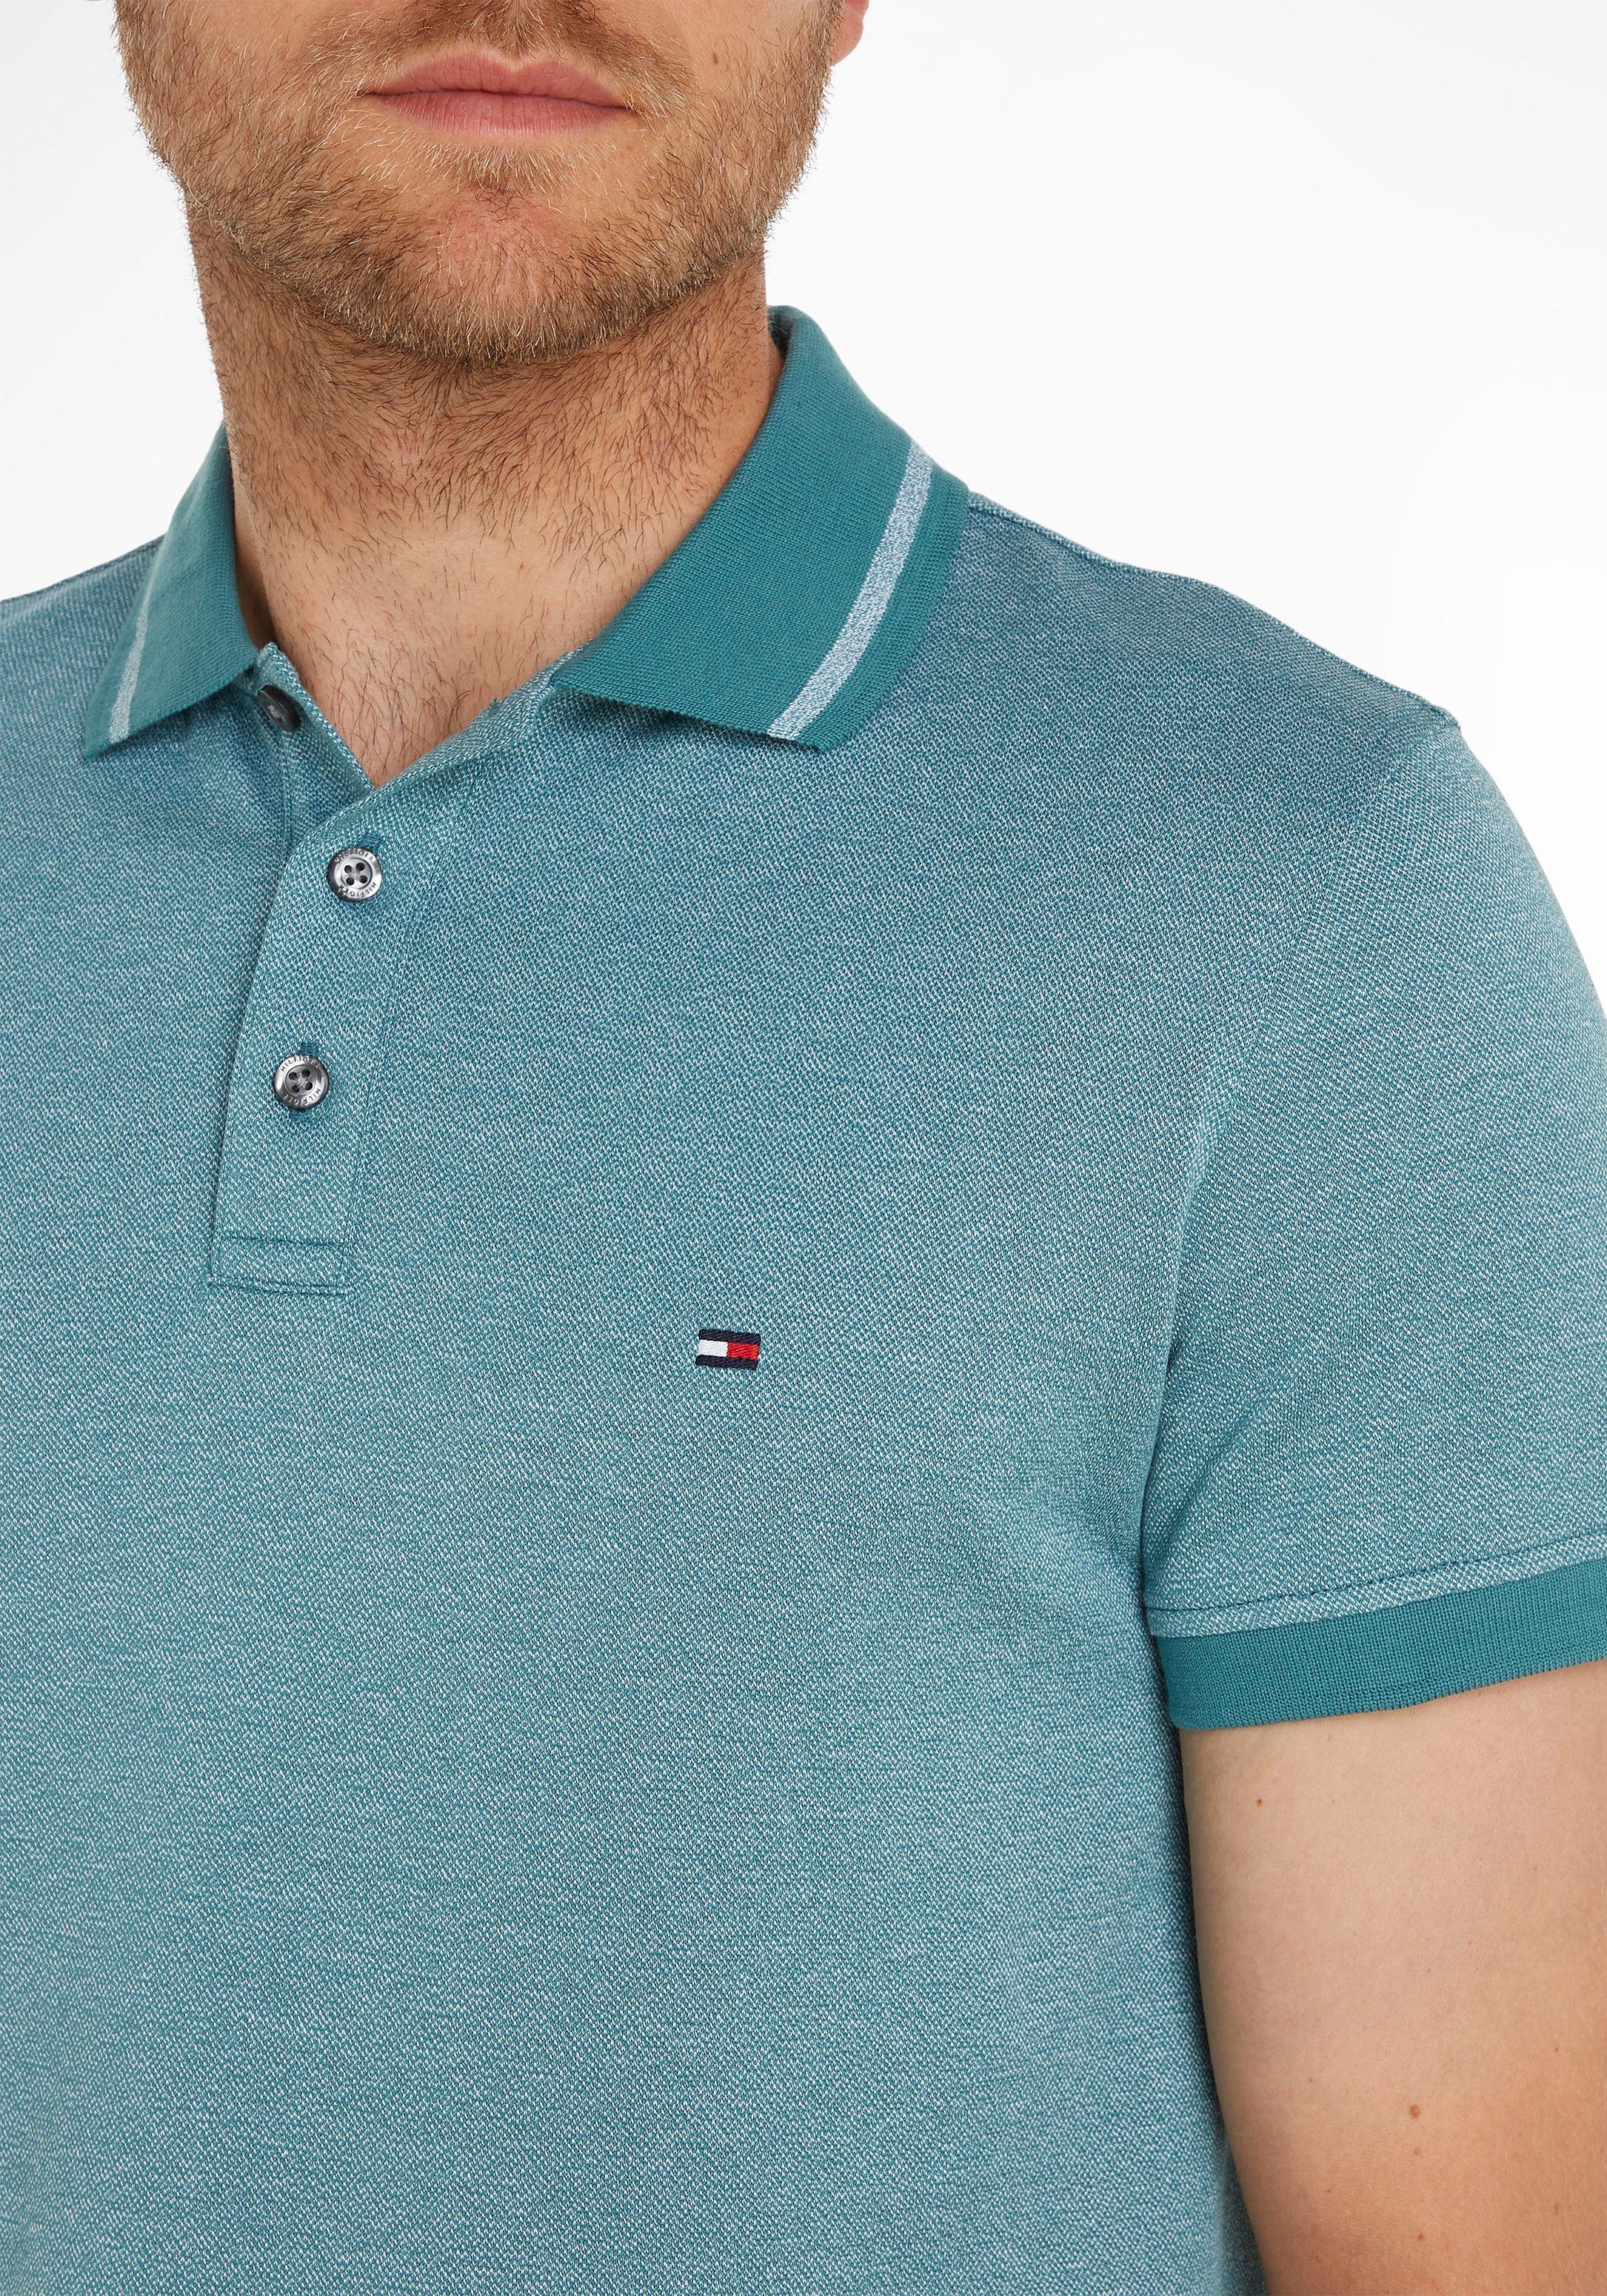 Tommy Hilfiger Poloshirt PRETWIST MOULINE Green/White Frosted Mouline-Optik TIPPED in POLO